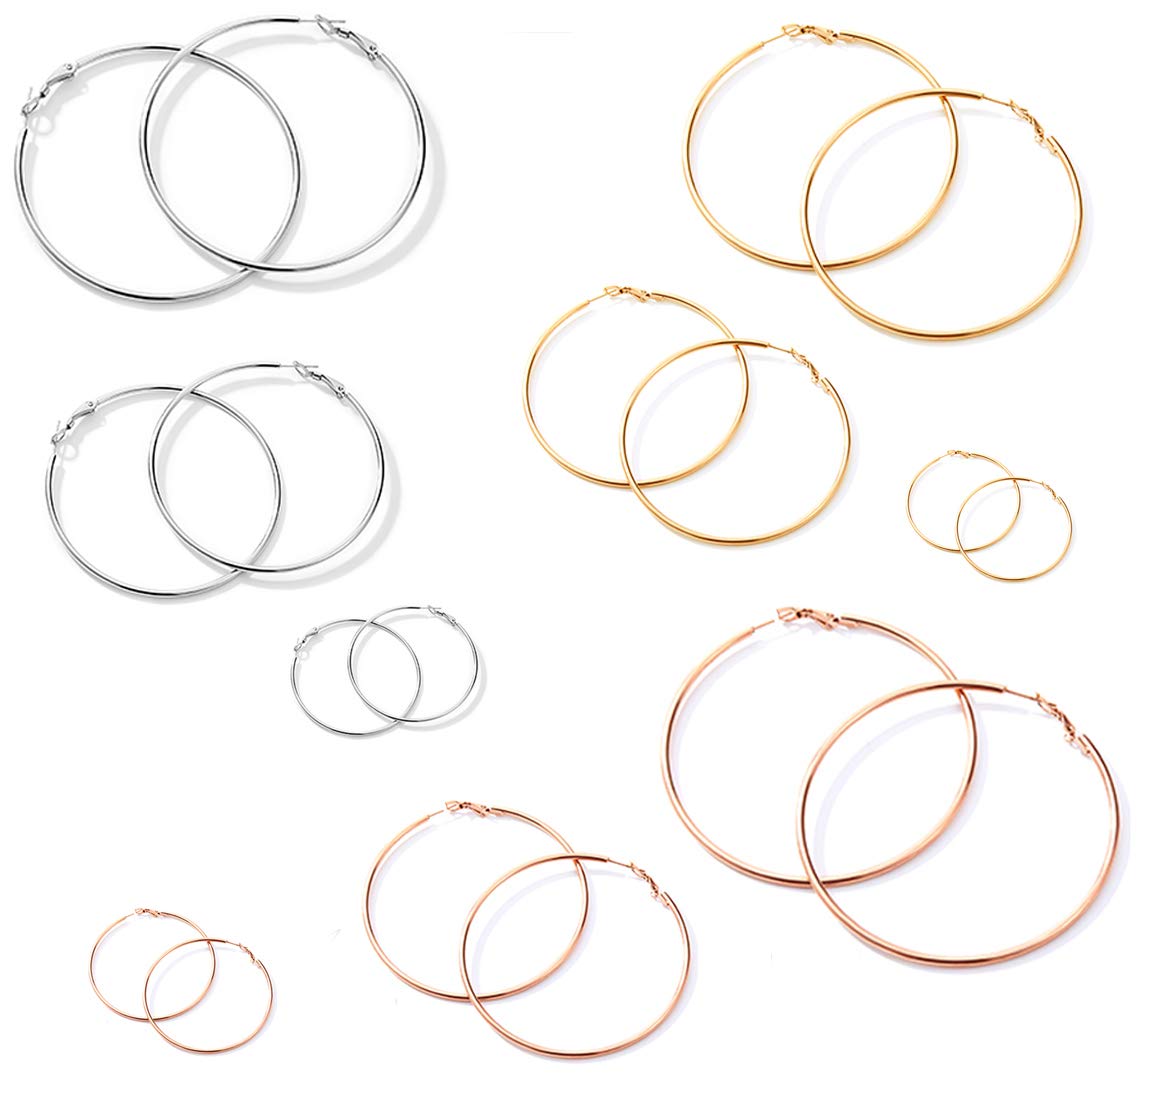 Cocamiky 9 Pairs Big Gold Hoop Earrings set for Women Girls,Stainless Steel 14K Gold Plated Thin Hoops Rose Gold Silver Hypoallergenic Sterling Silver Post for Sensitive Ears Jewelry